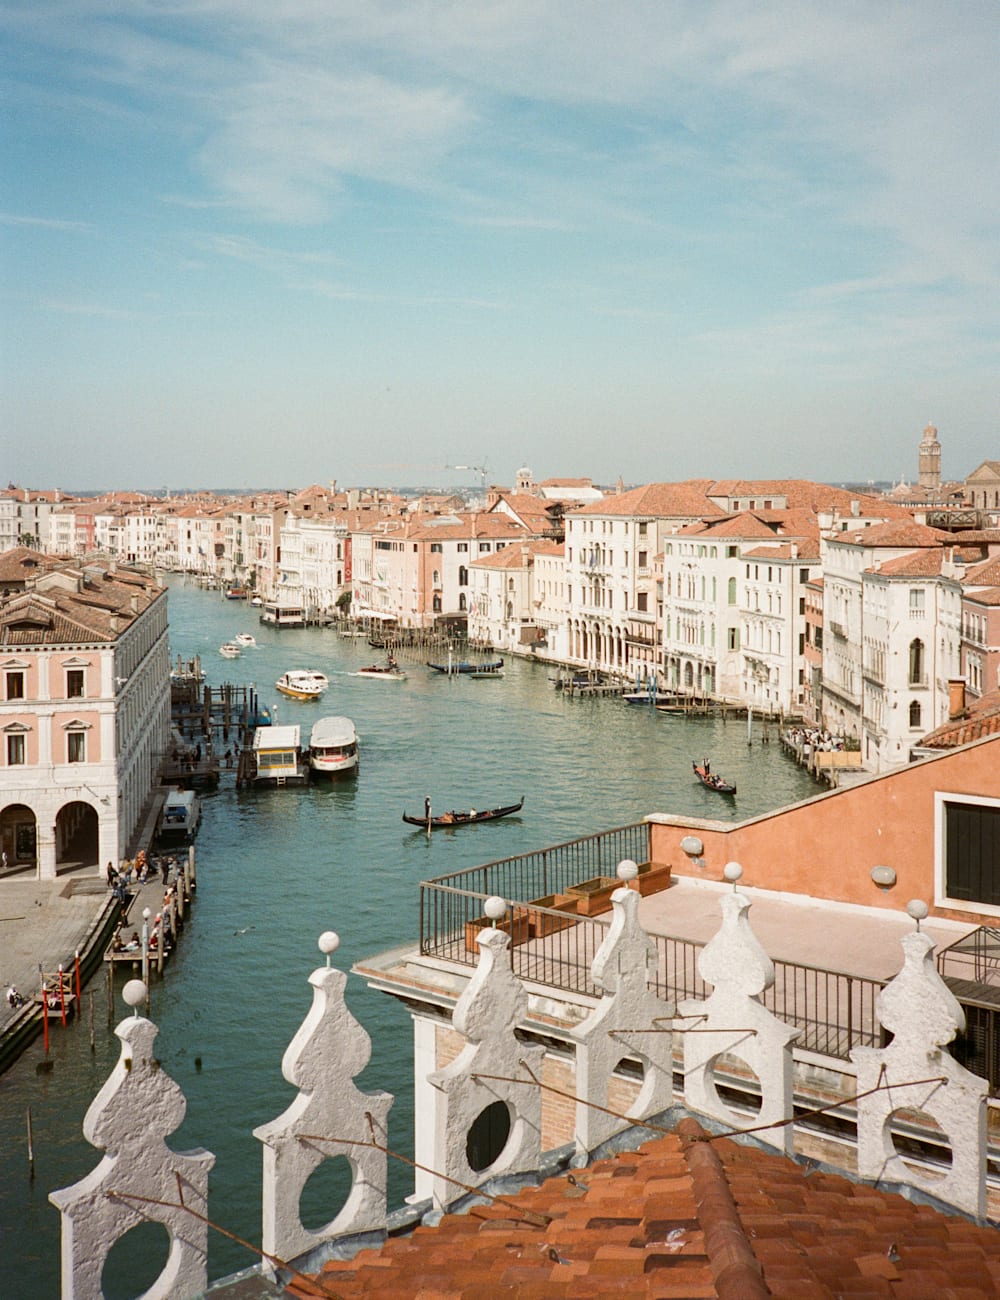 View from Venice from above, with white and orange rooftops